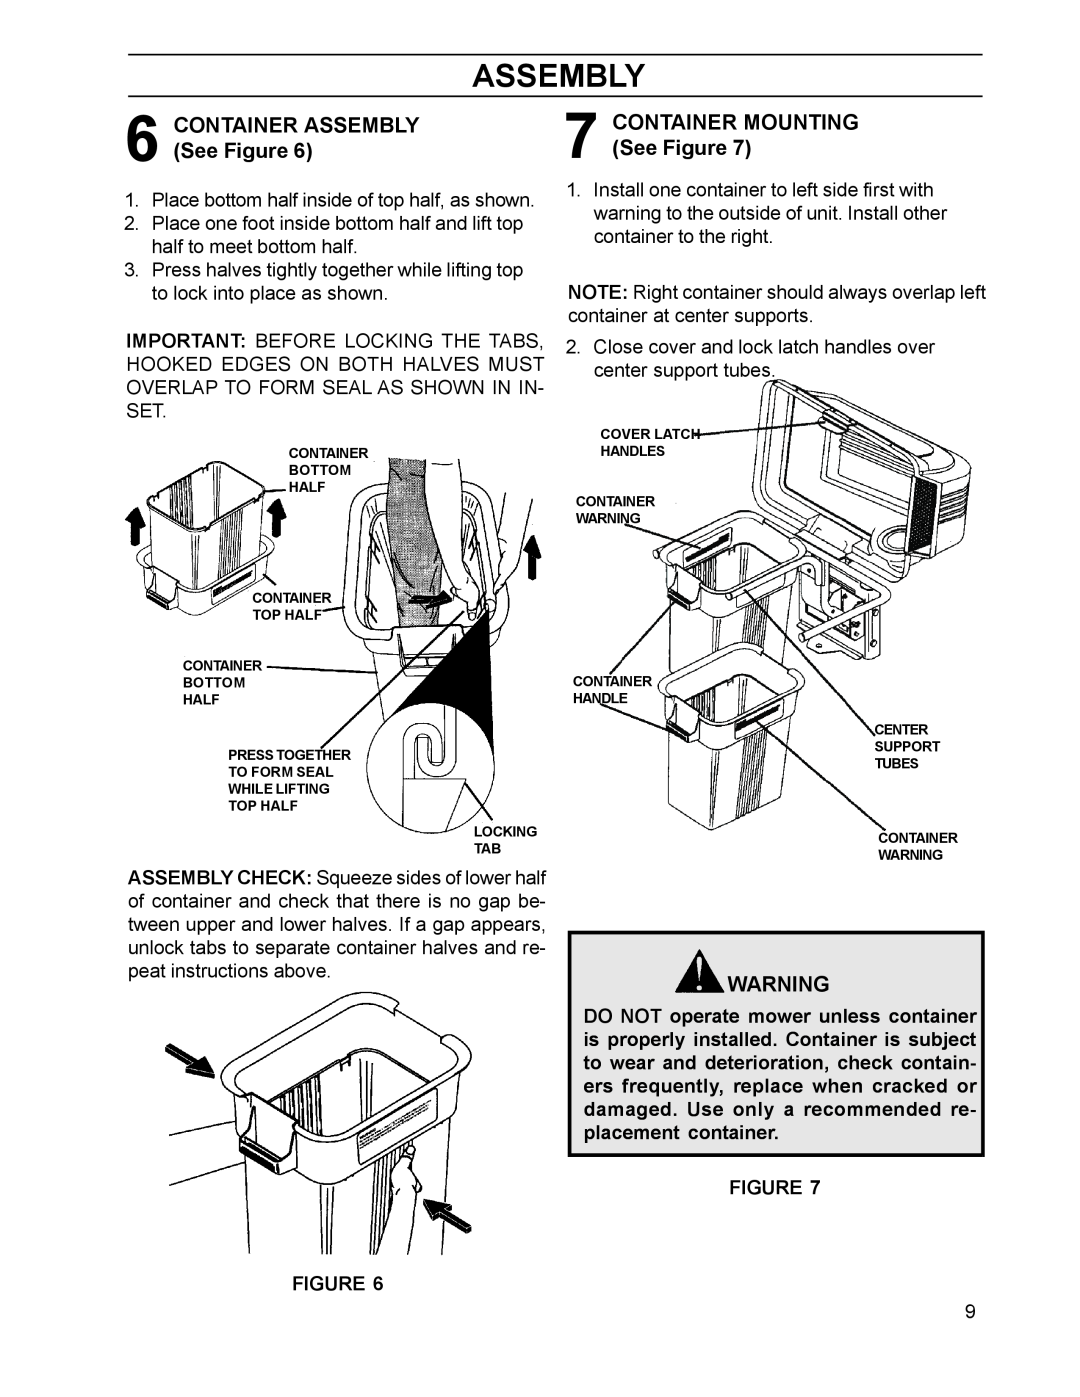 HTC 110163 / CZ38 manual CONTAINER MOUNTING See Figure, CONTAINER ASSEMBLY See Figure, Assembly 